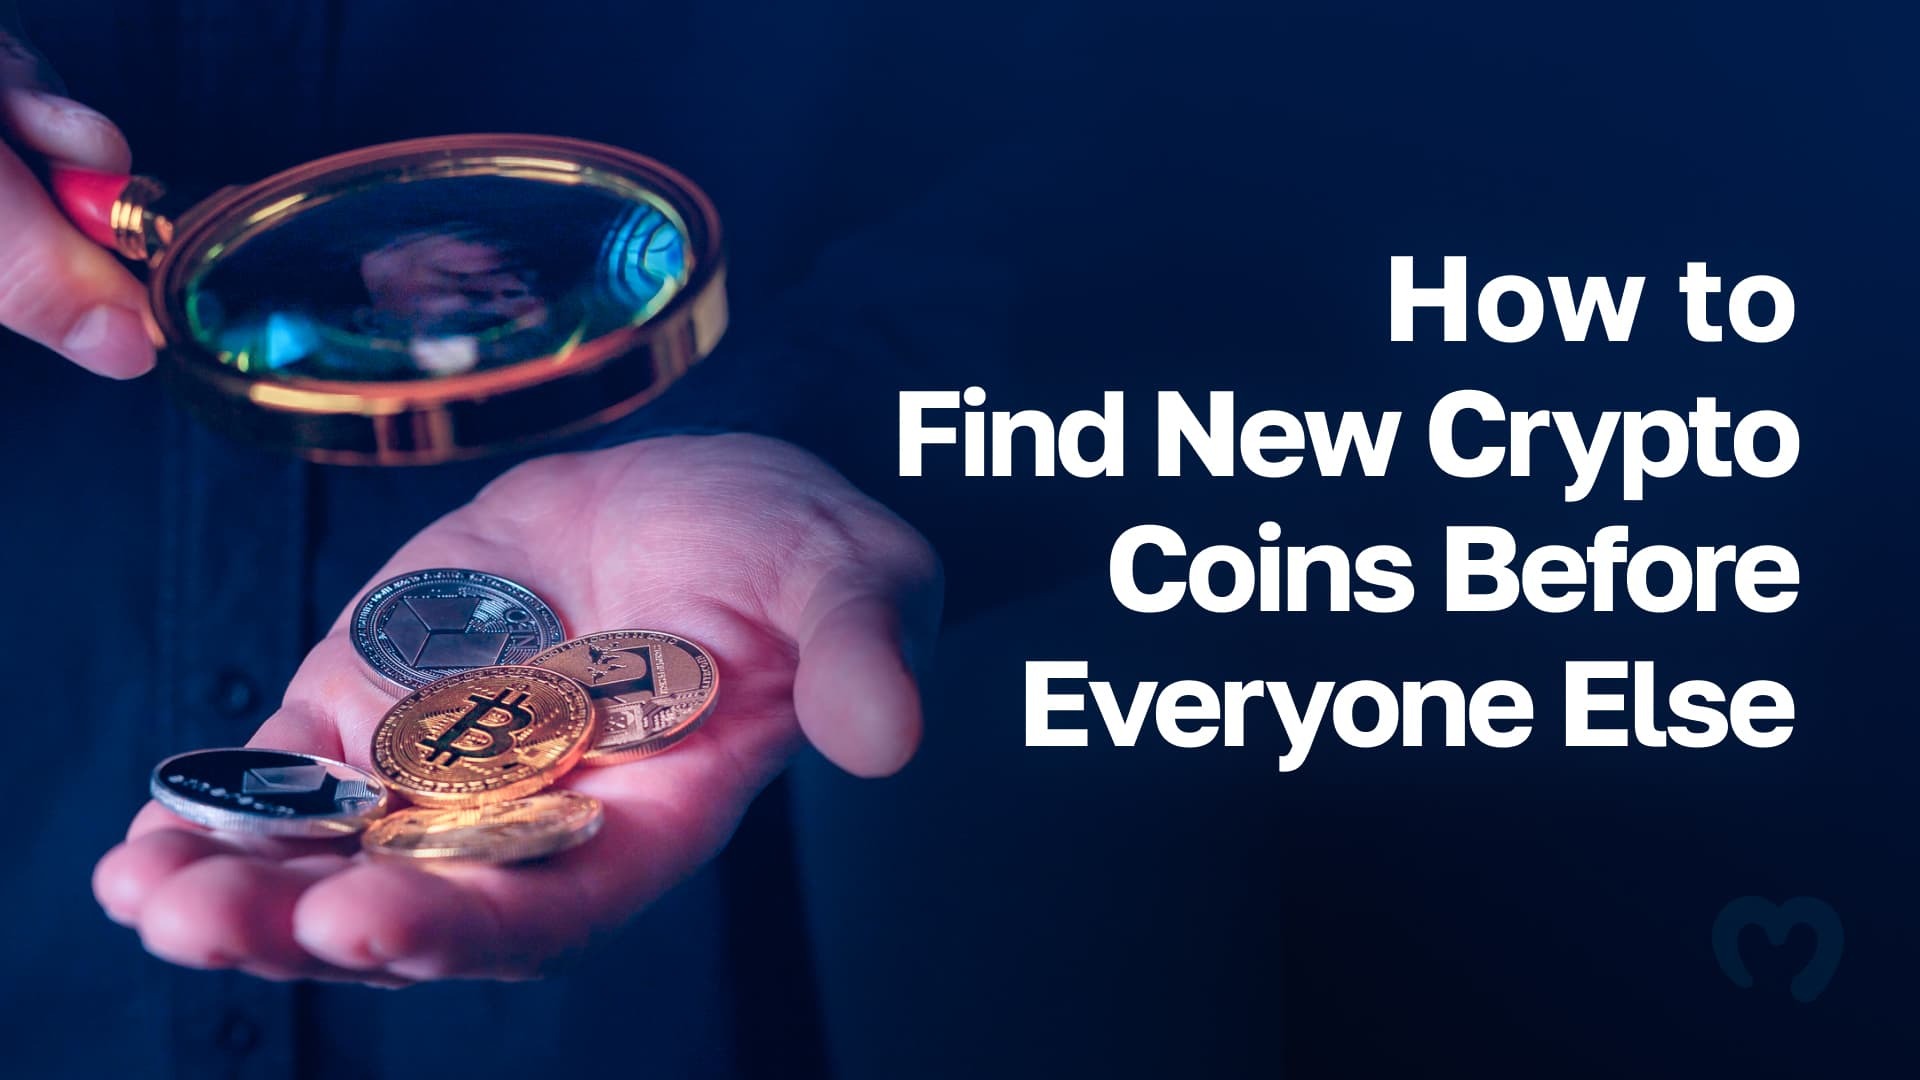 How to Find New Crypto Coins Before Everyone Else